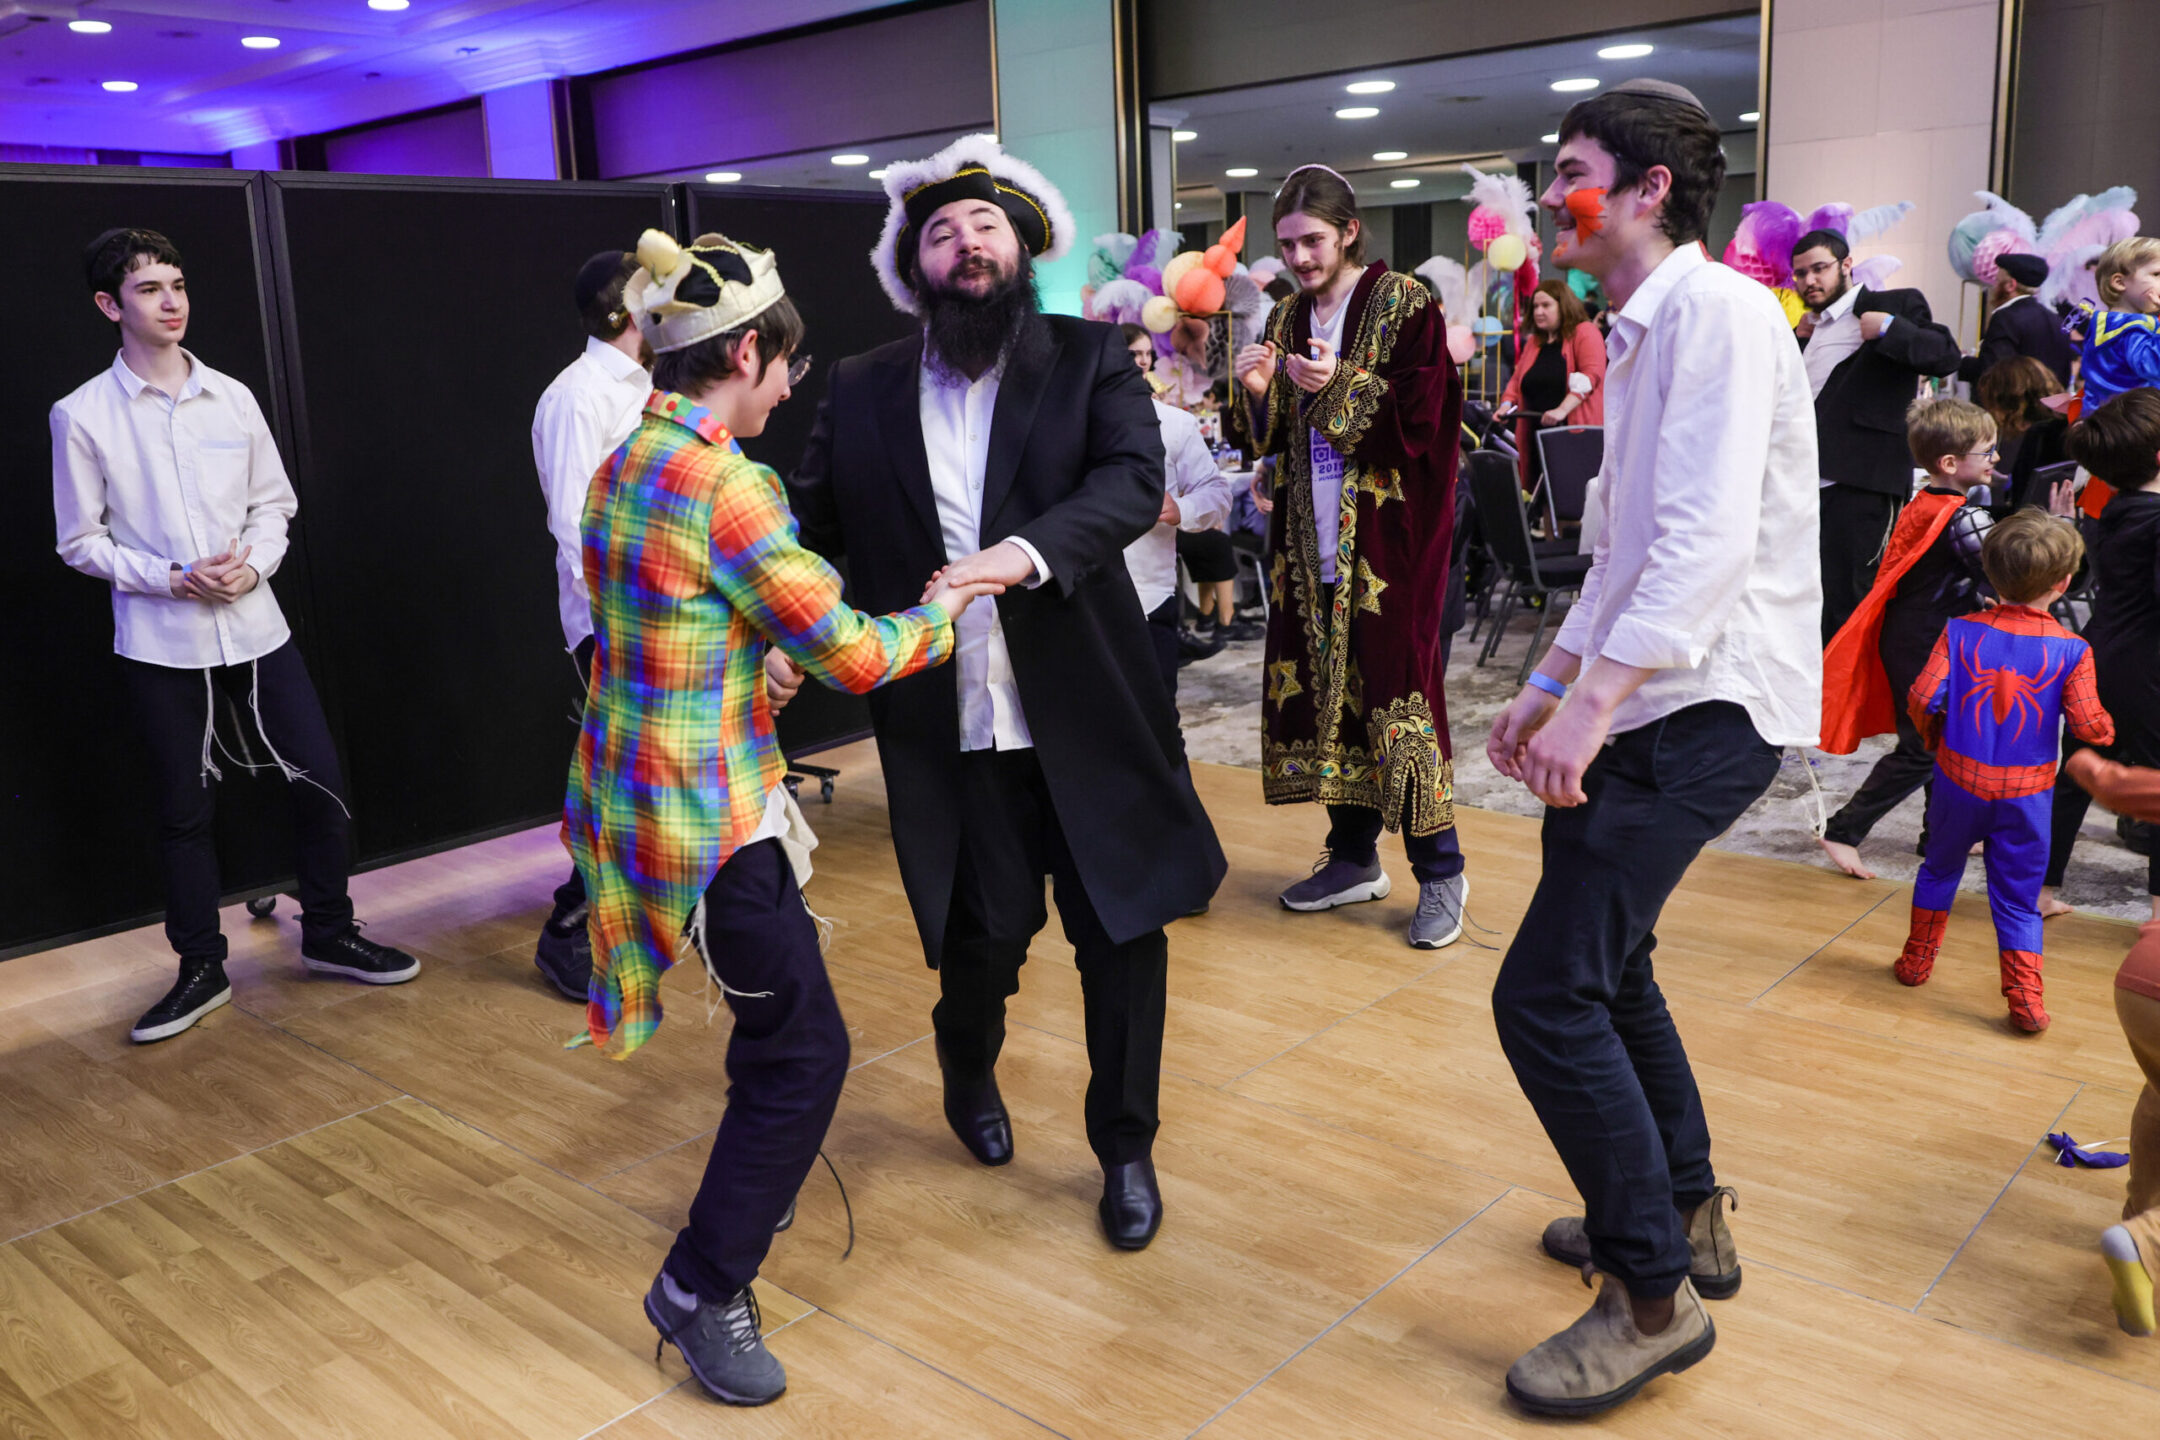 Jewish children from Odessa in war-torn Ukraine celebrate Purim 2022 with members of the Chabad Berlin Jewish community, March 17, 2022. (Omer Messinger/Getty Images)